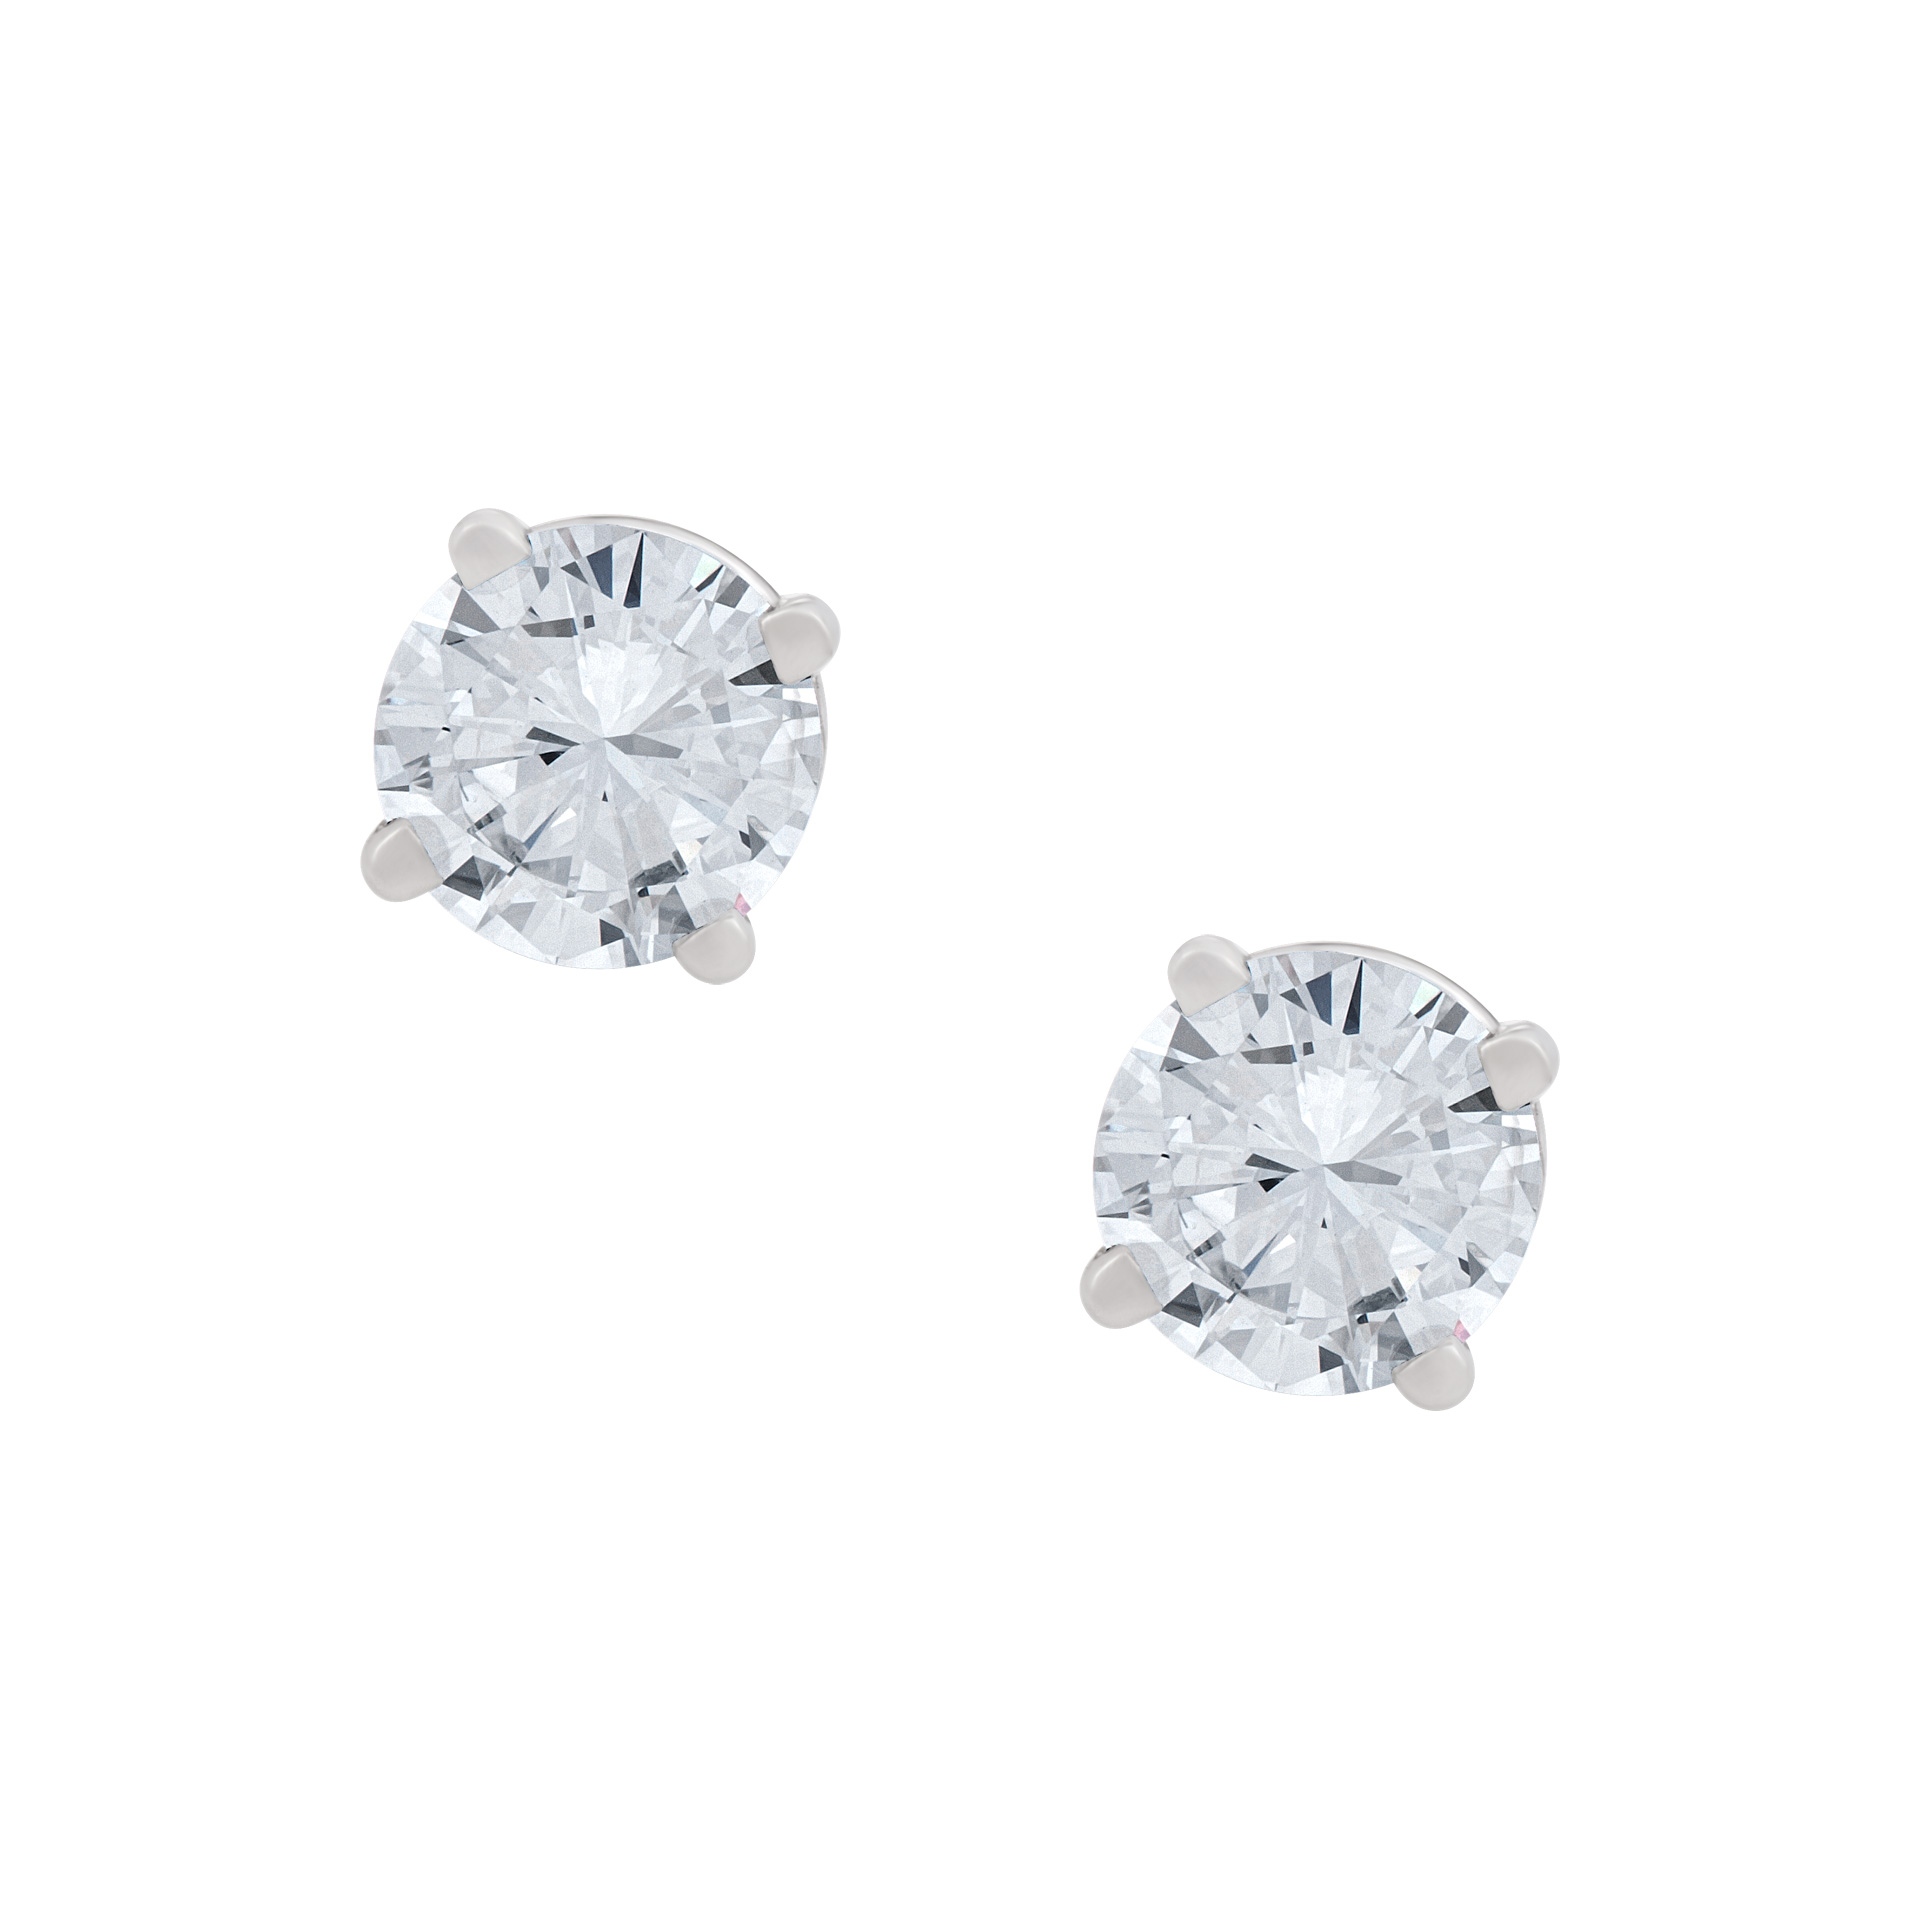 Gia Certified Diamond Studs .83cts G Color I-1 Clarity .82 D Color I-1 Clarity image 1